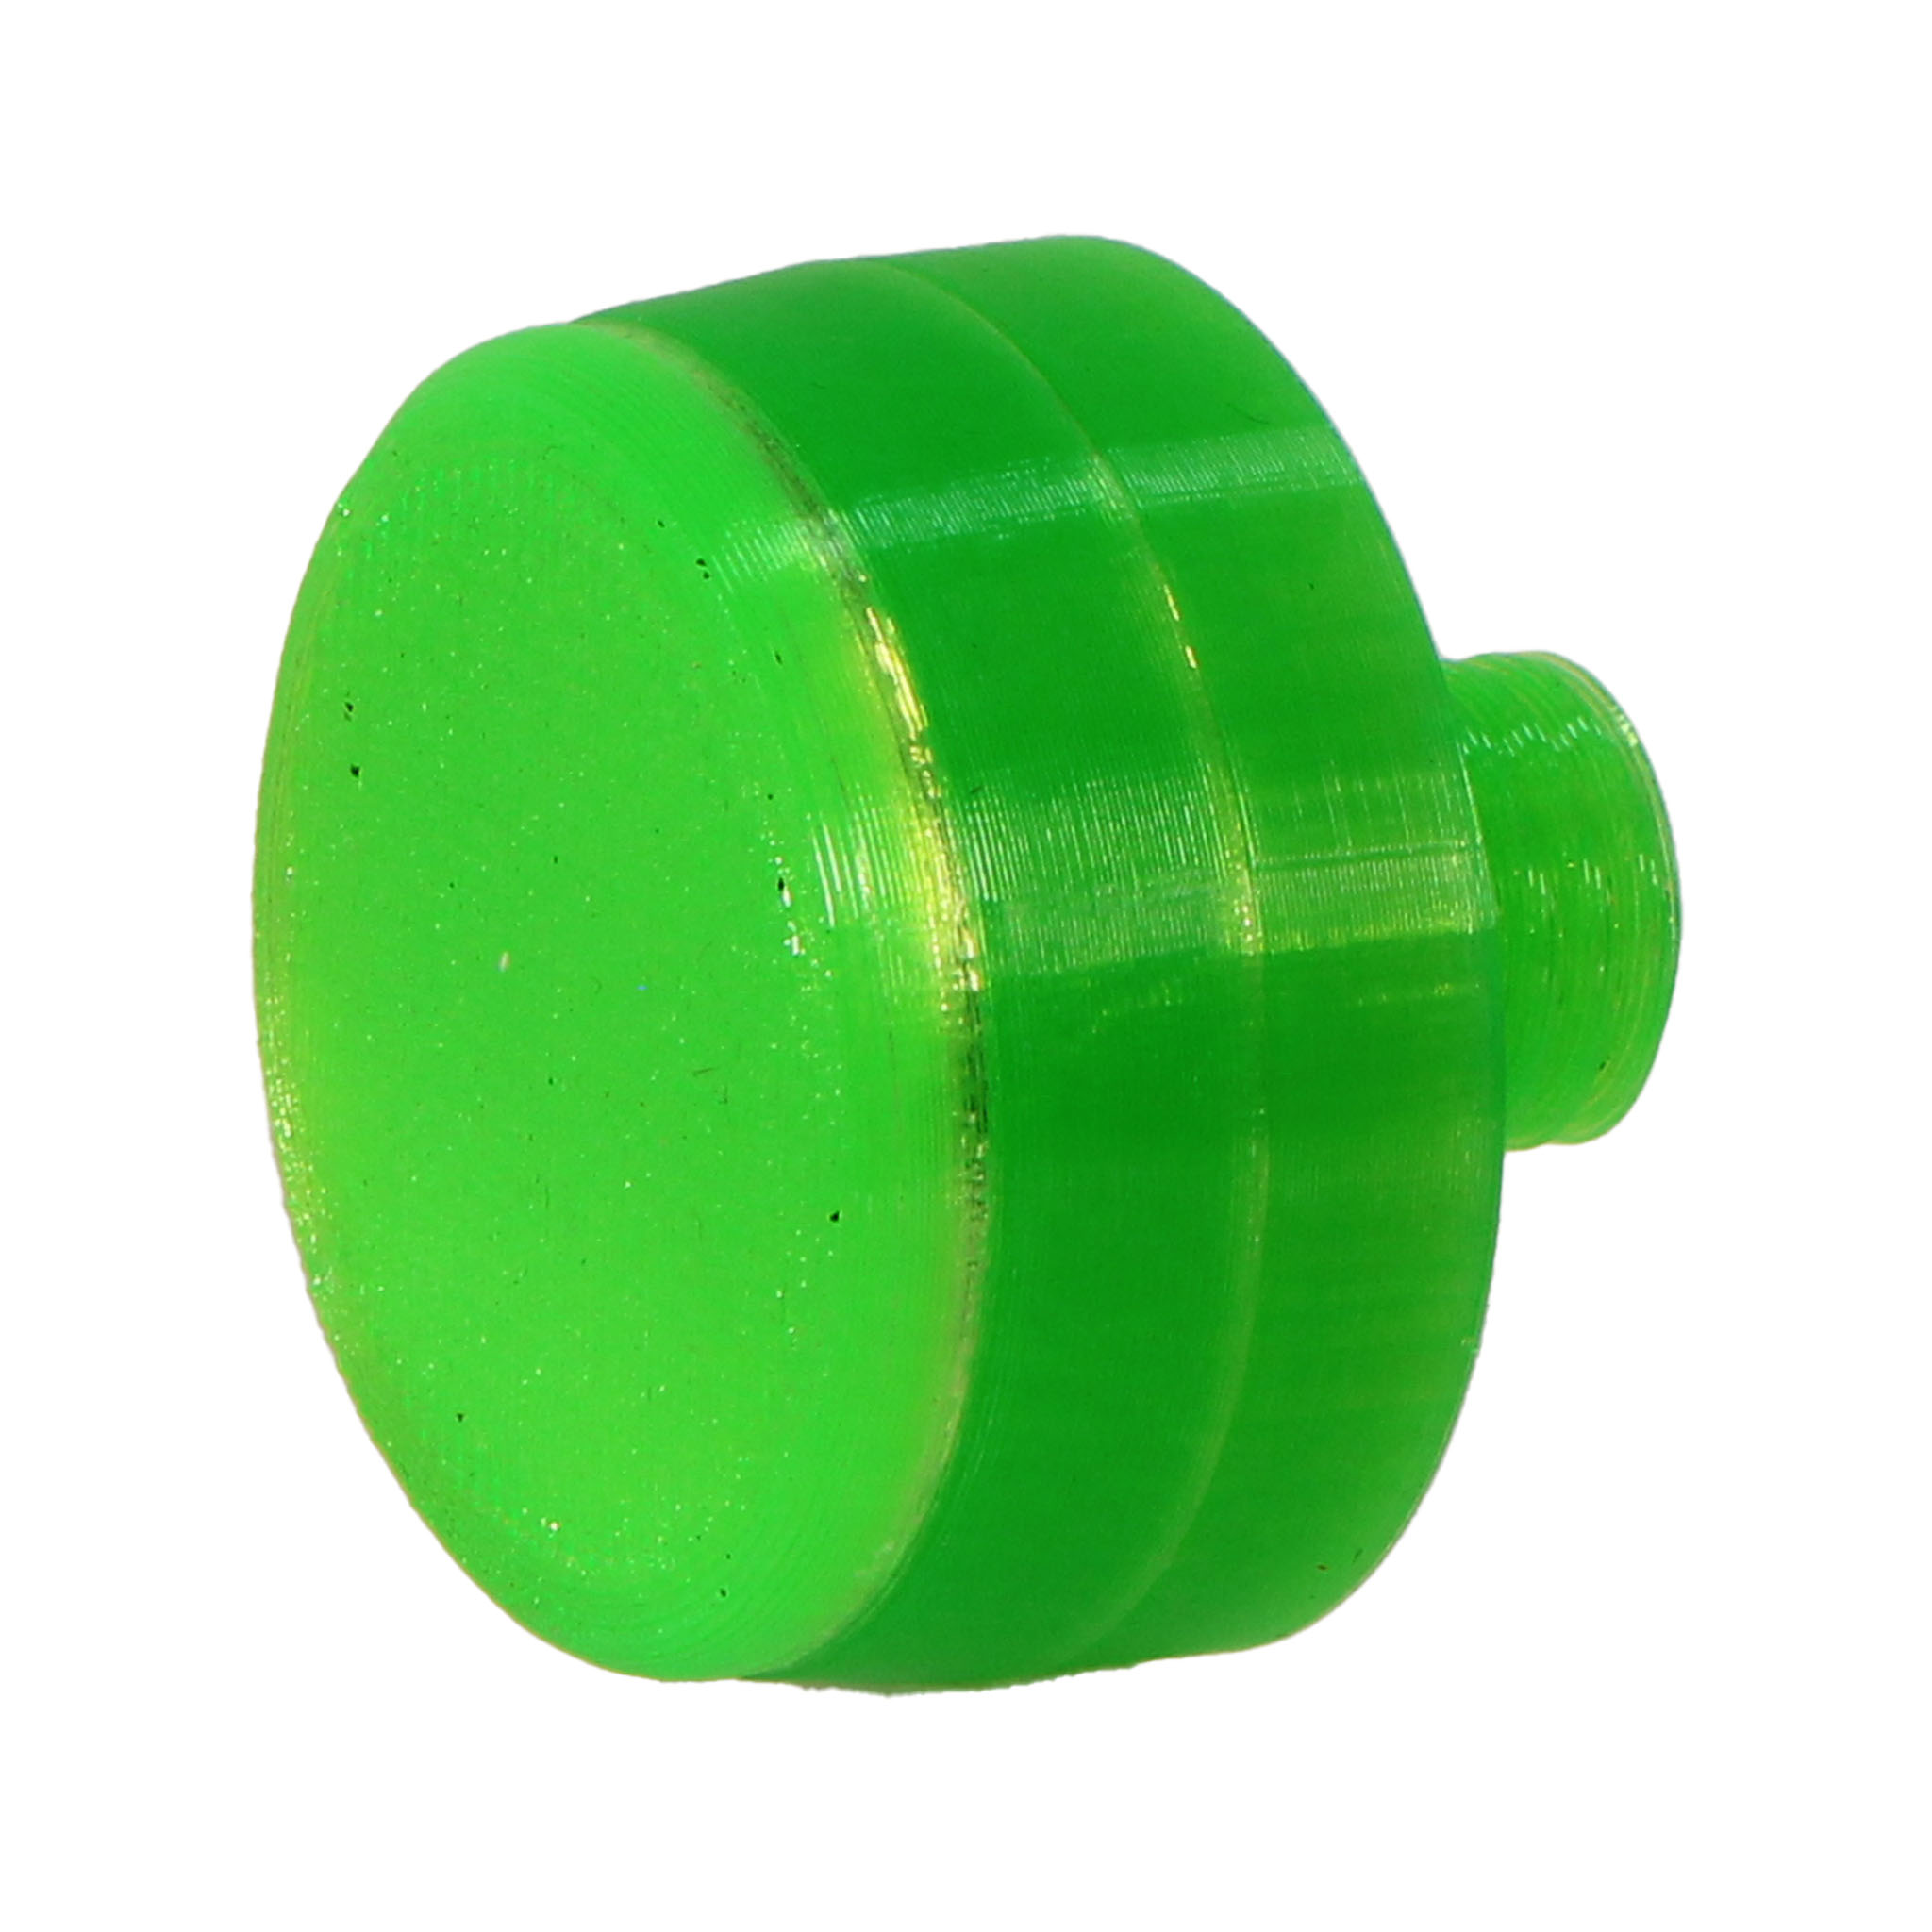 Elevation Wheel Co Replacement Head for Park HMR-4 Shop Hammer, Green